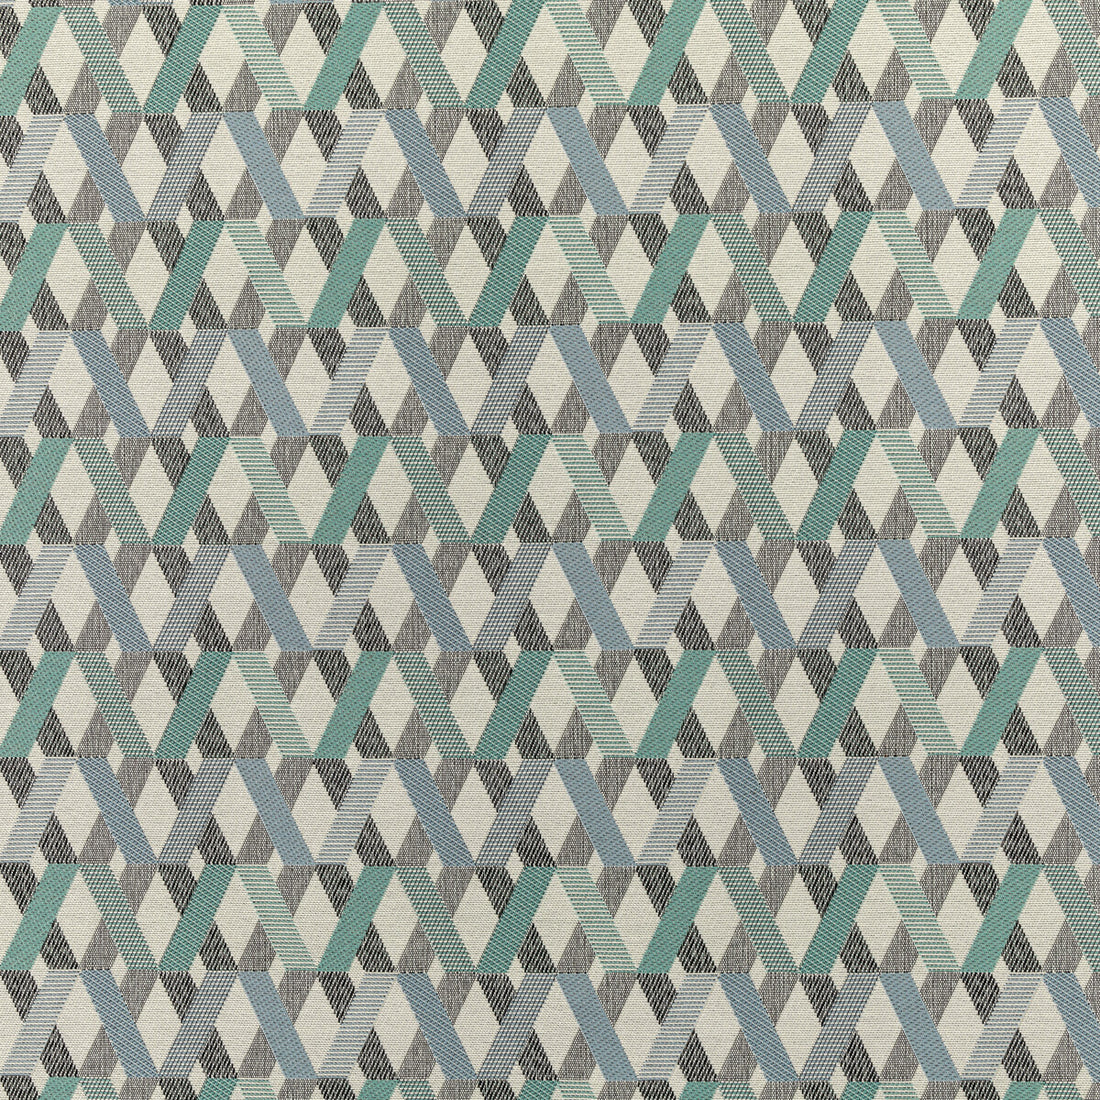 Bridgework fabric in oasis color - pattern 36276.815.0 - by Kravet Contract in the Gis Crypton collection